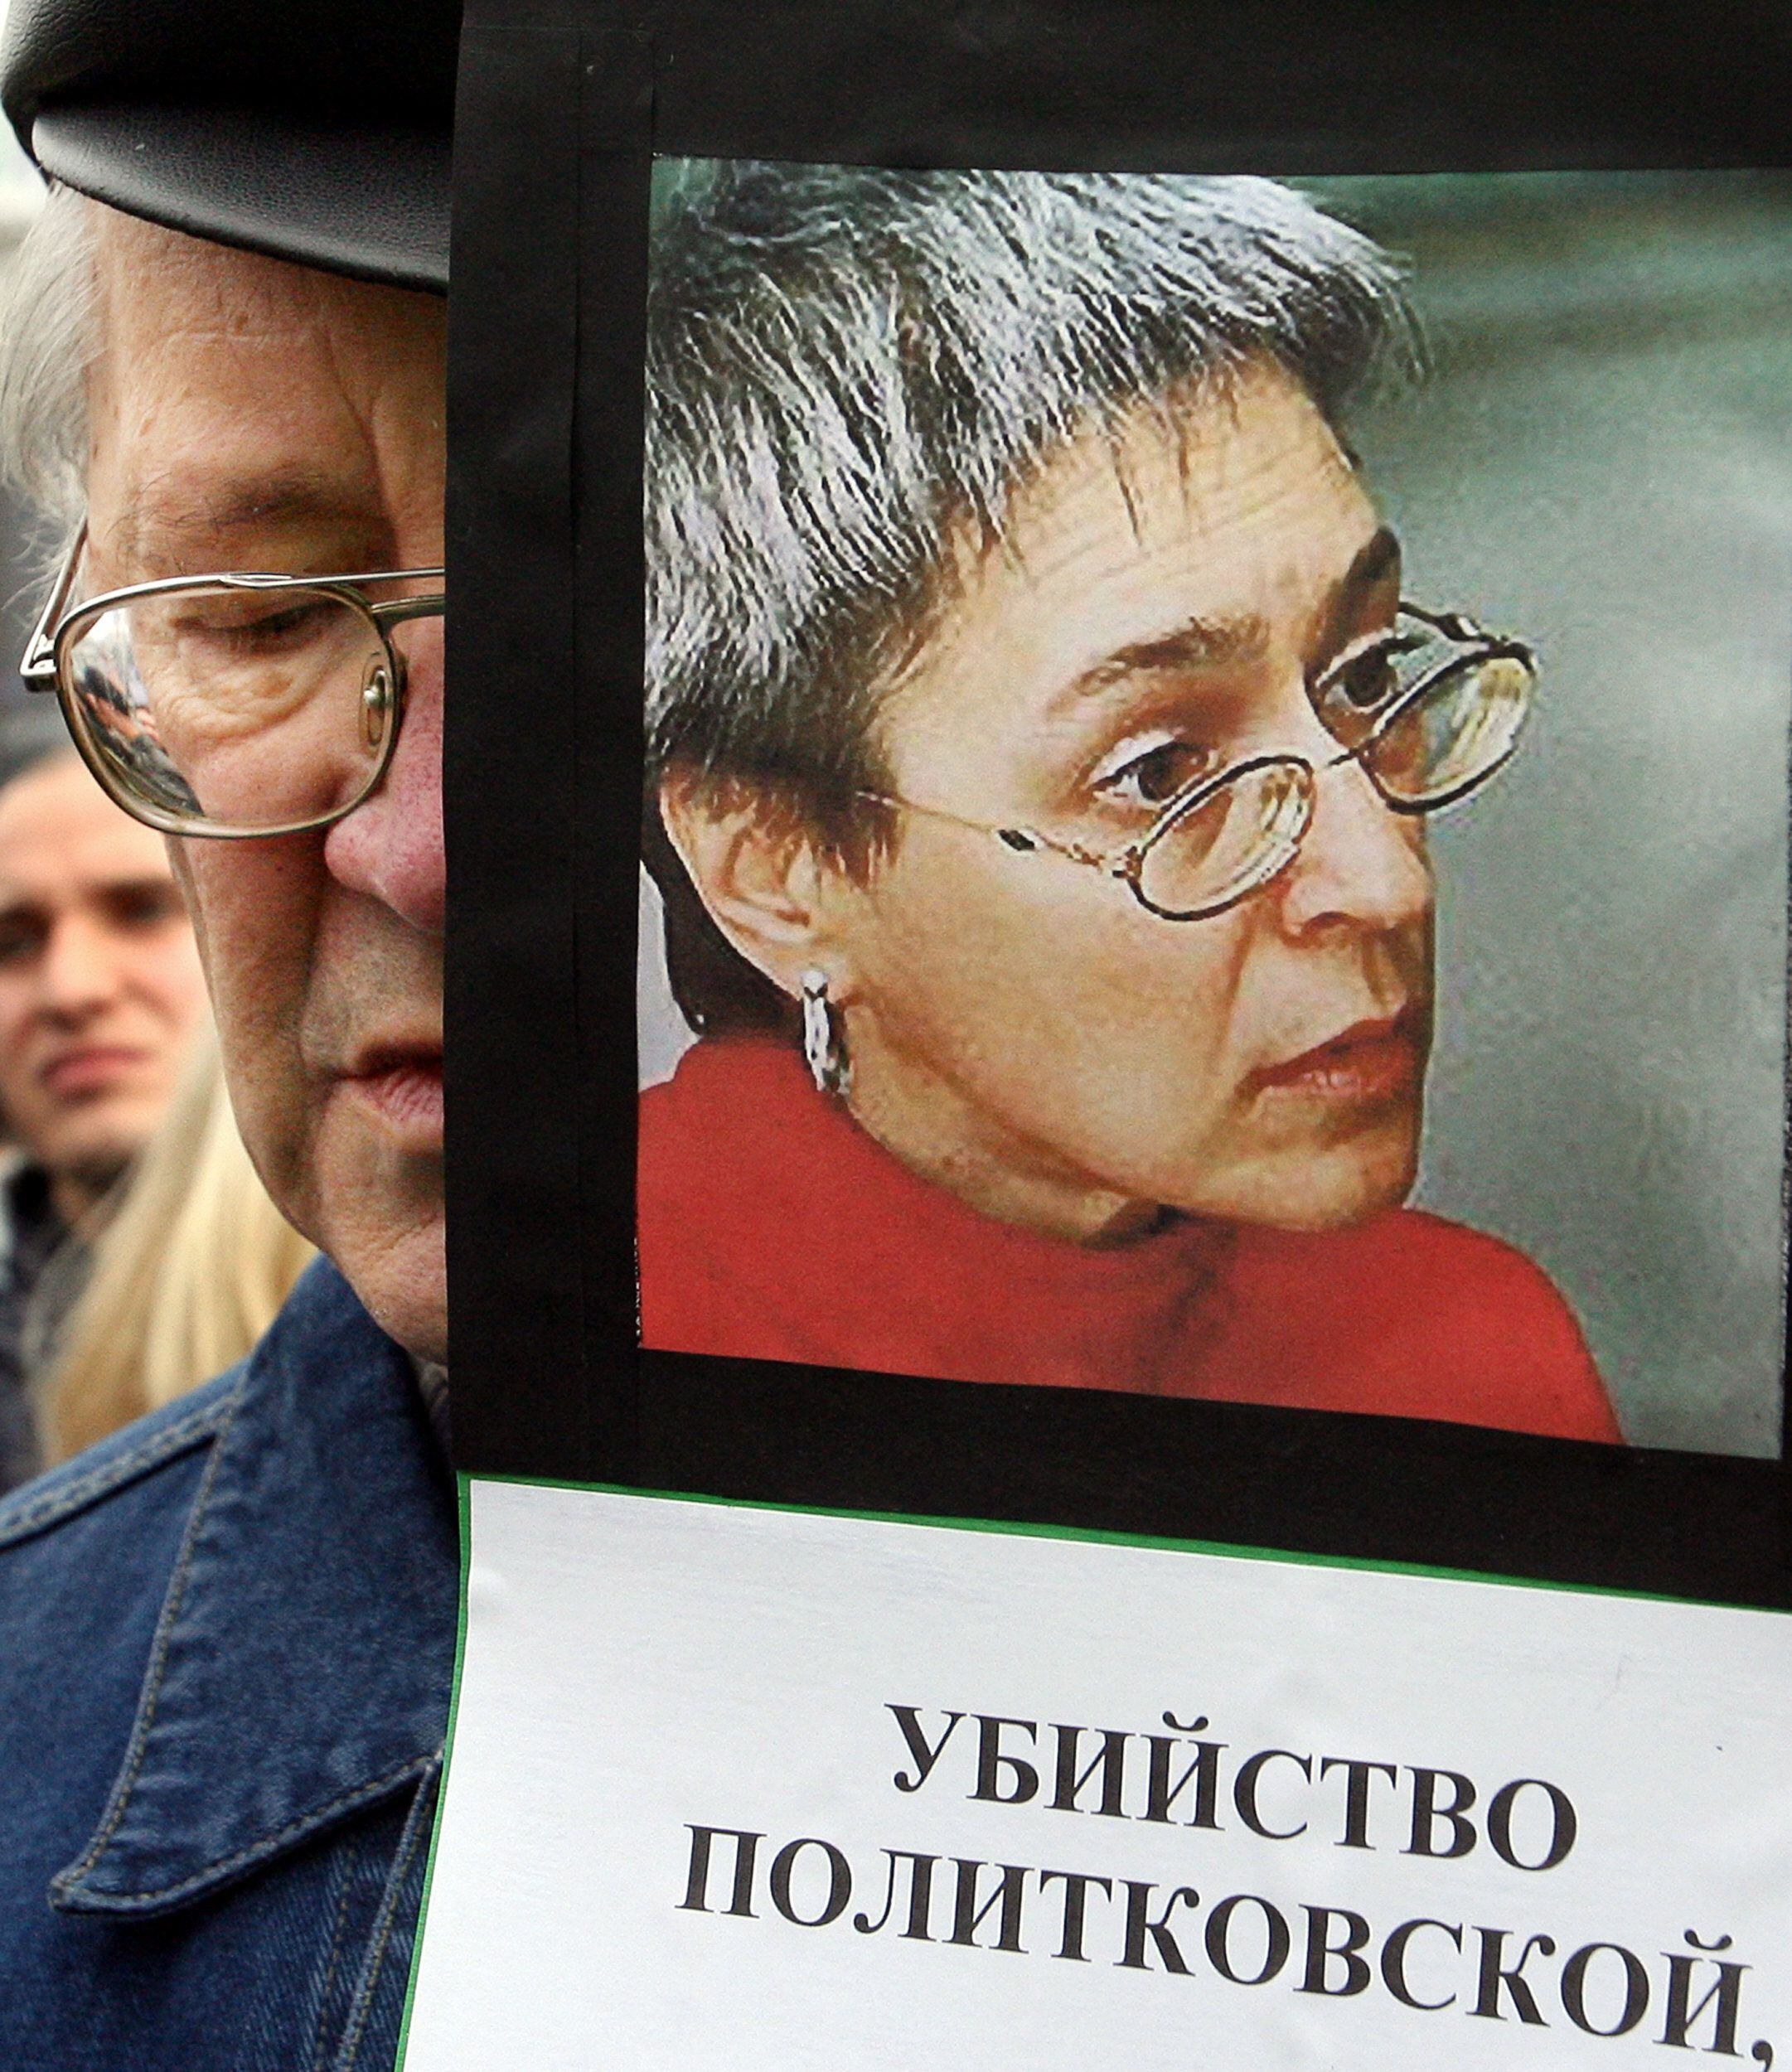 A man holds a photograph of murdered journalist Anna Politkovskaya during a human rights demonstration in central Moscow on October 8, 2006. (AFP PHOTO/YURI KADOBNOV).